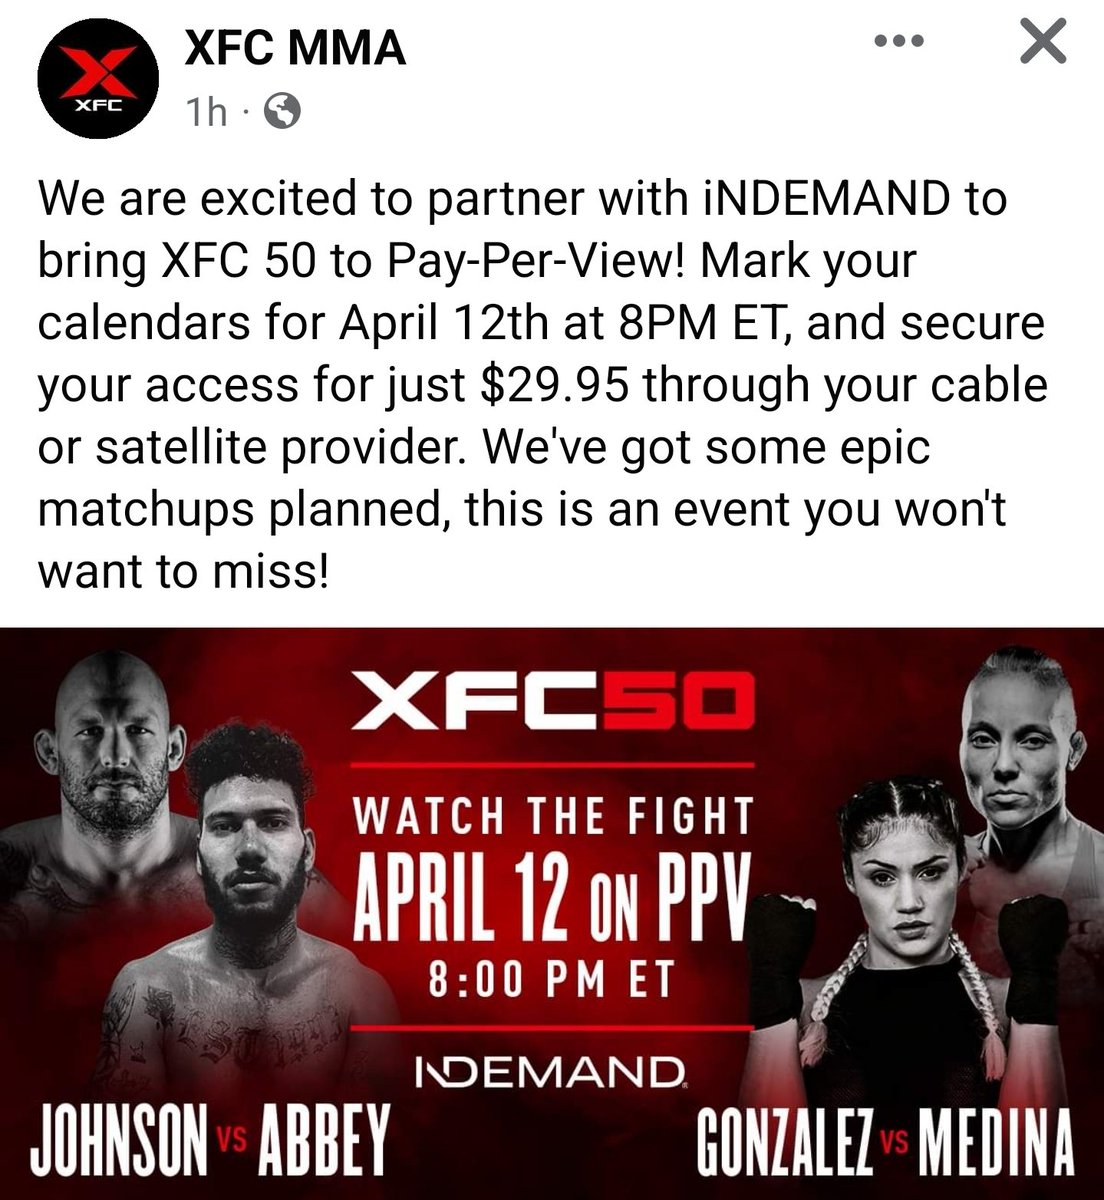 Extremely disappointing to see the XFC offering this card on ppv. The company doesn't have a very good relationship with fighters and fans right now, and charging $30 for #XFC50 just doesn't sit right. #mma